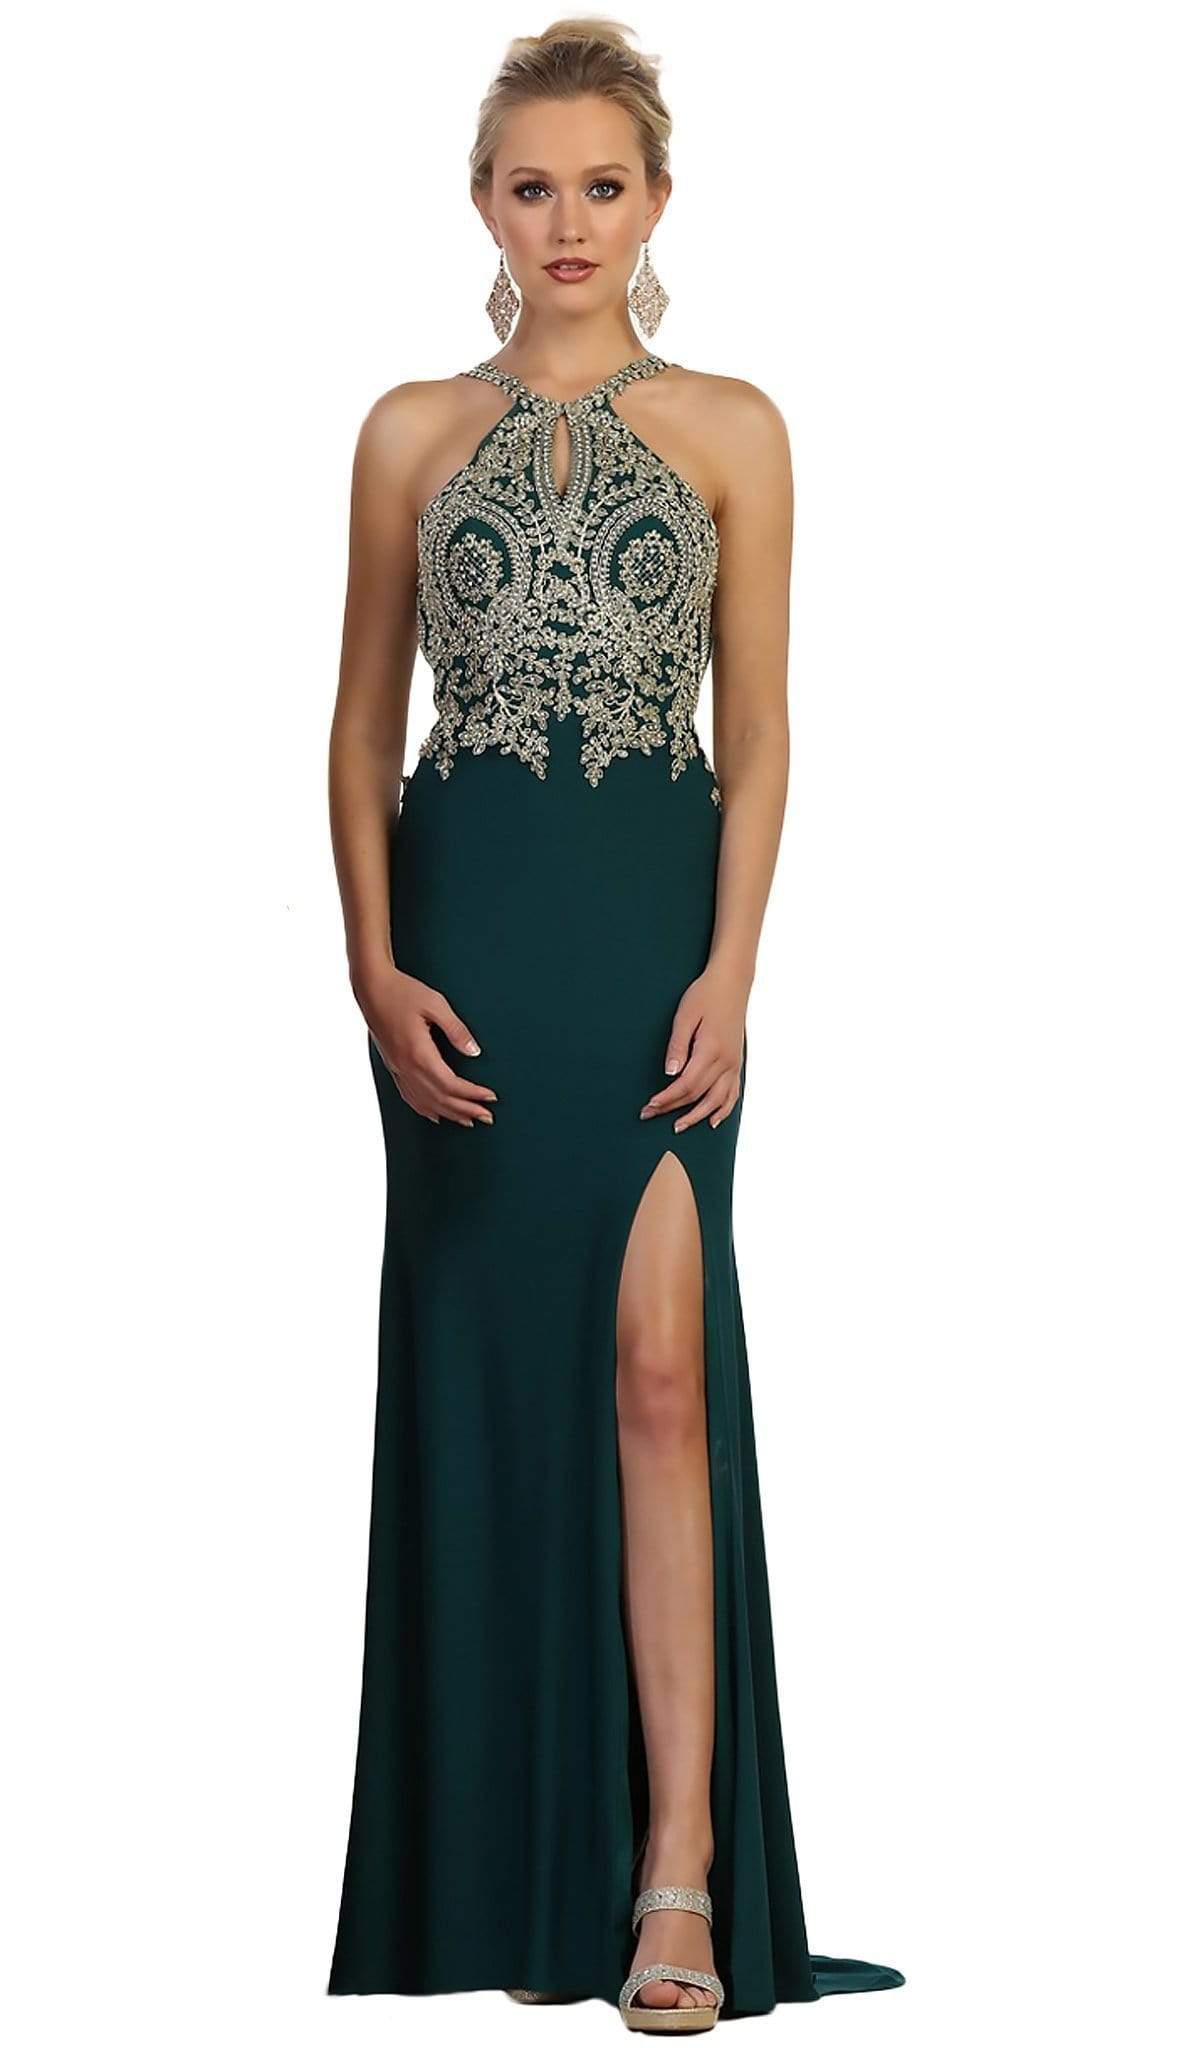 May Queen - Embellished Halter Sheath Evening Gown Special Occasion Dress 2 / Hunter-Green